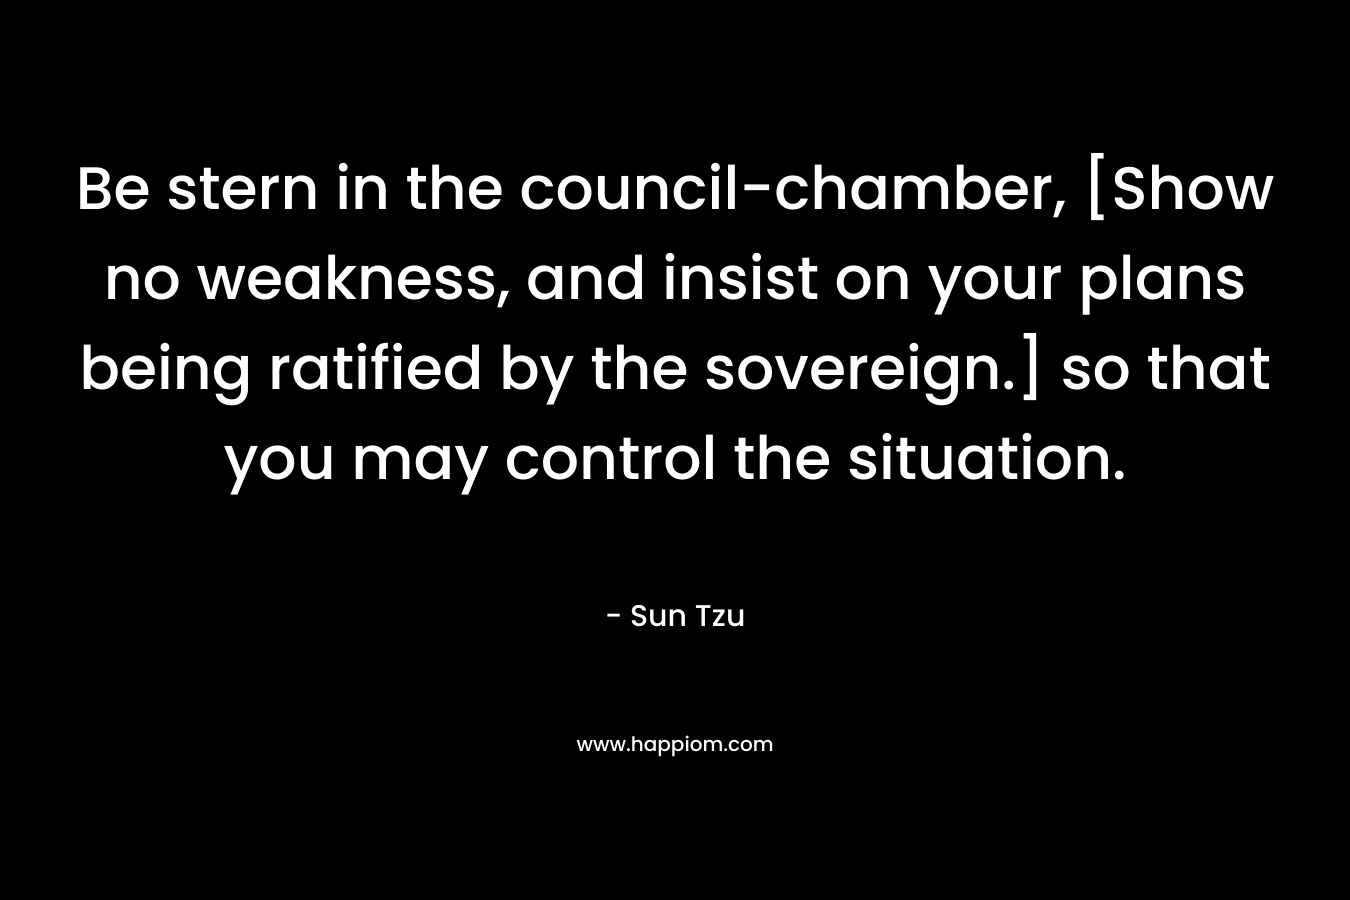 Be stern in the council-chamber, [Show no weakness, and insist on your plans being ratified by the sovereign.] so that you may control the situation.